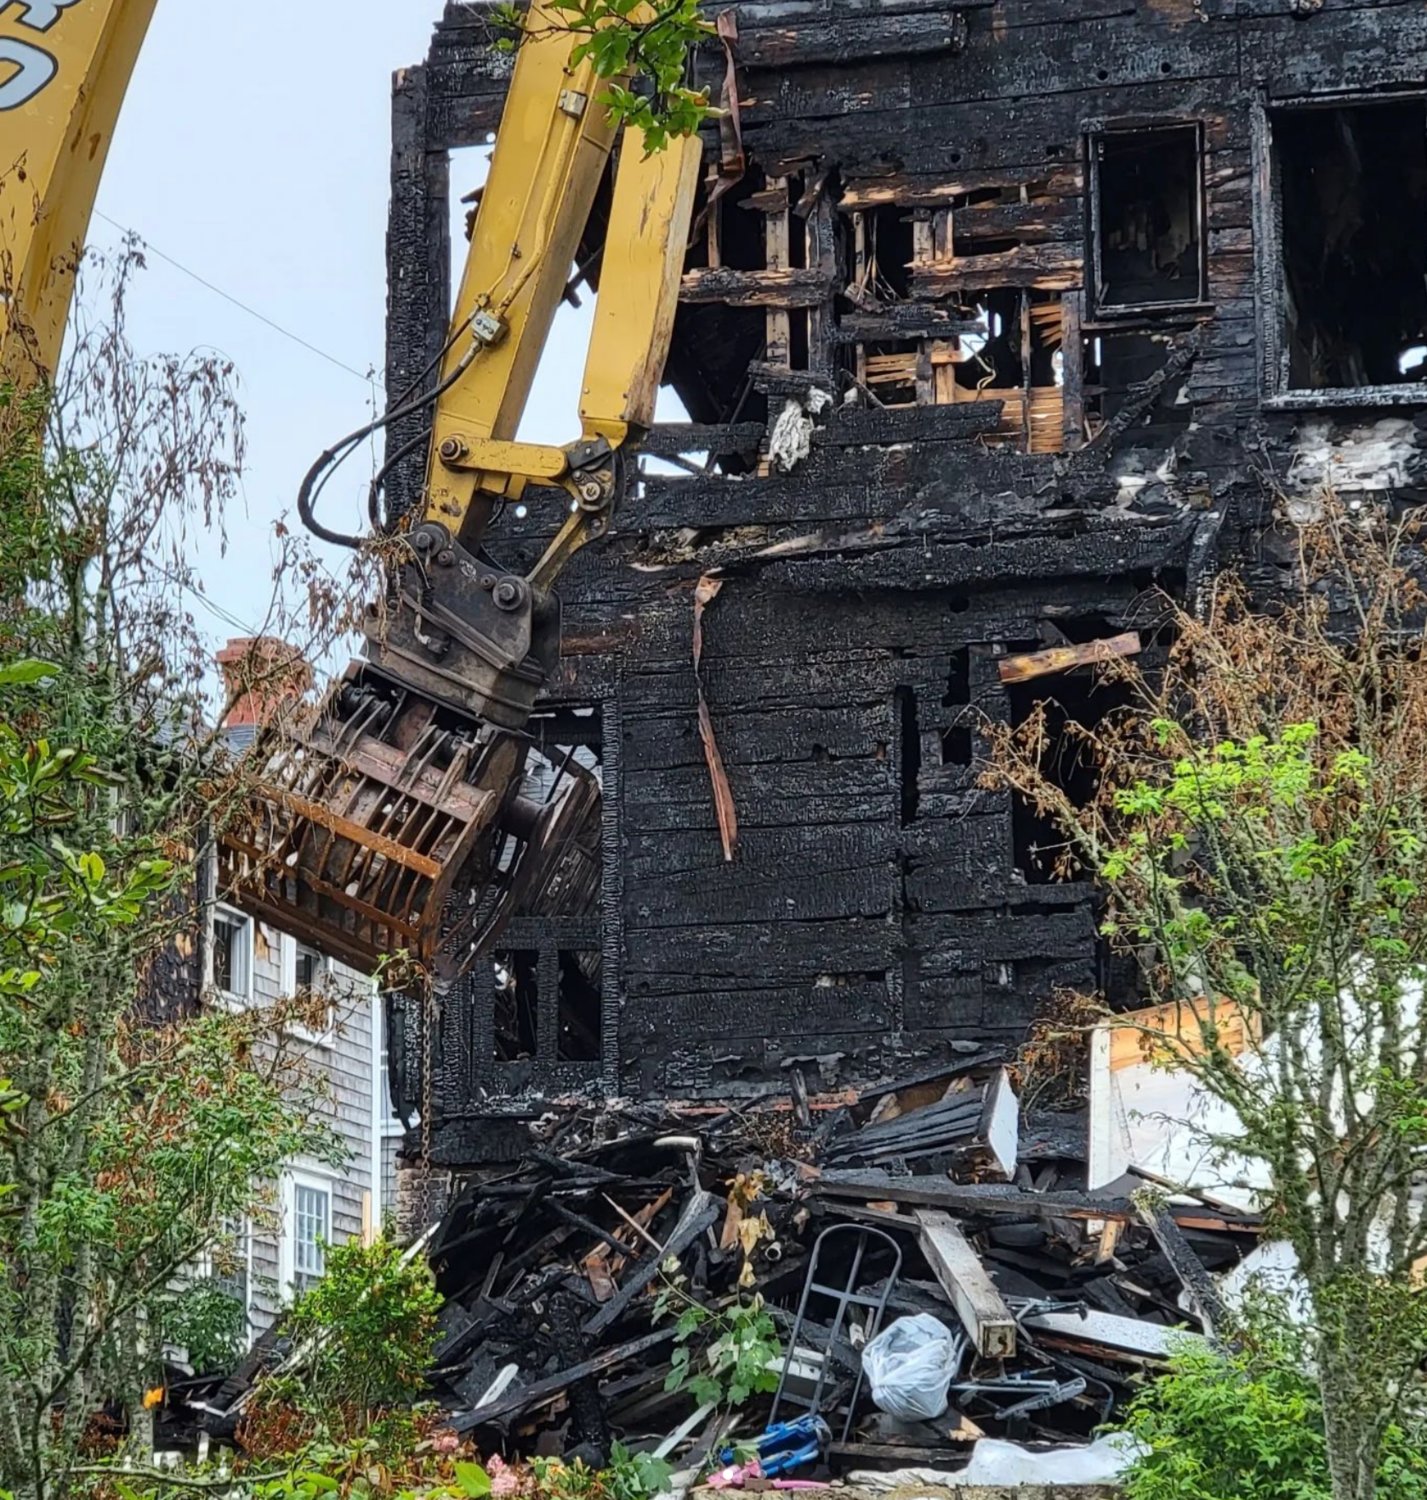 Demolition work on the Veranda House, destroyed by fire last month, began Monday morning.